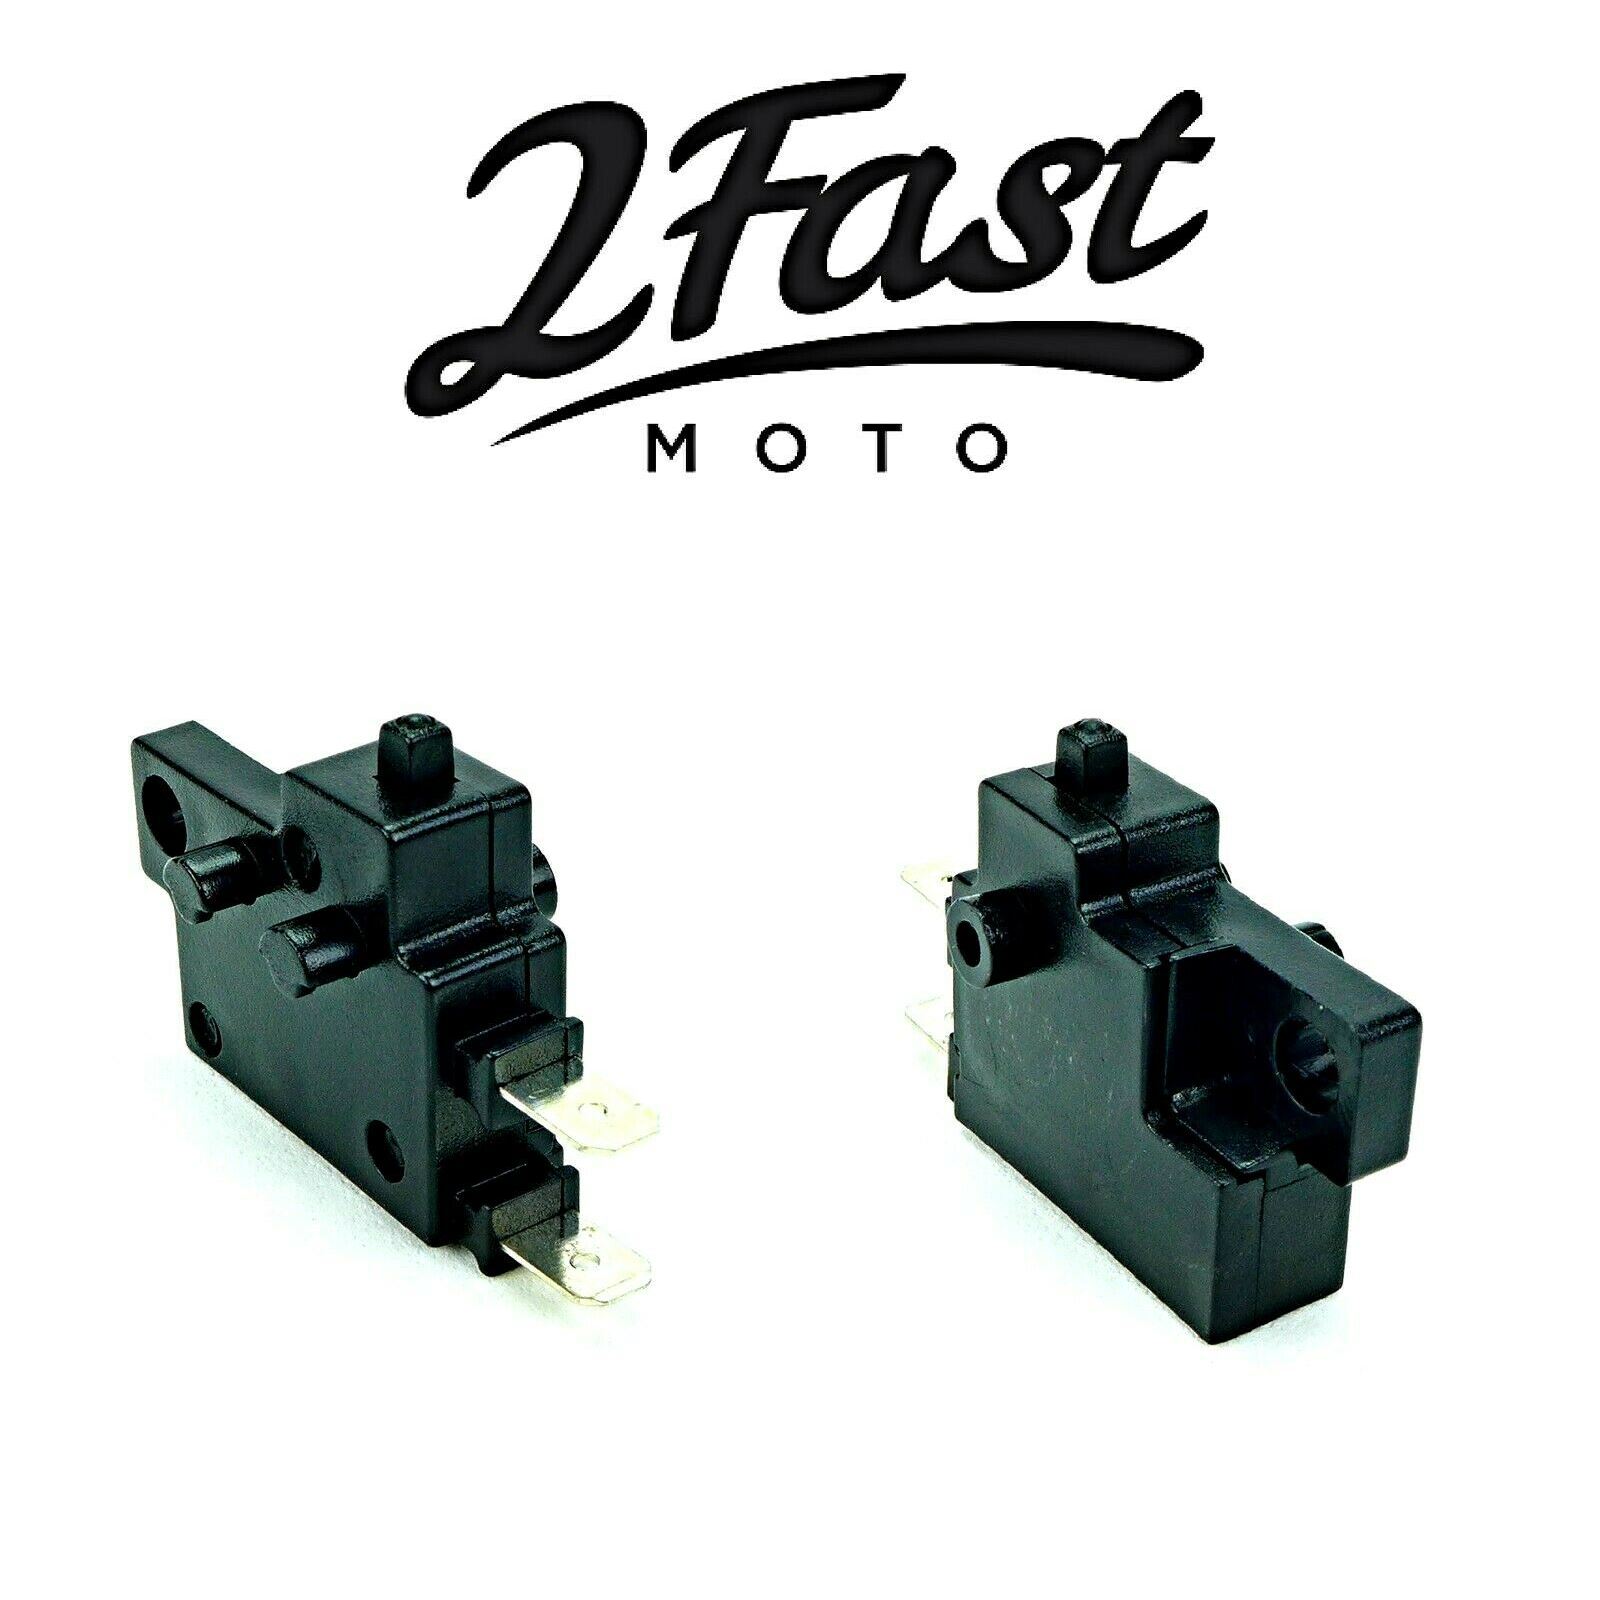 2FastMoto Front Stop Brake Switch Assembly For Yamaha